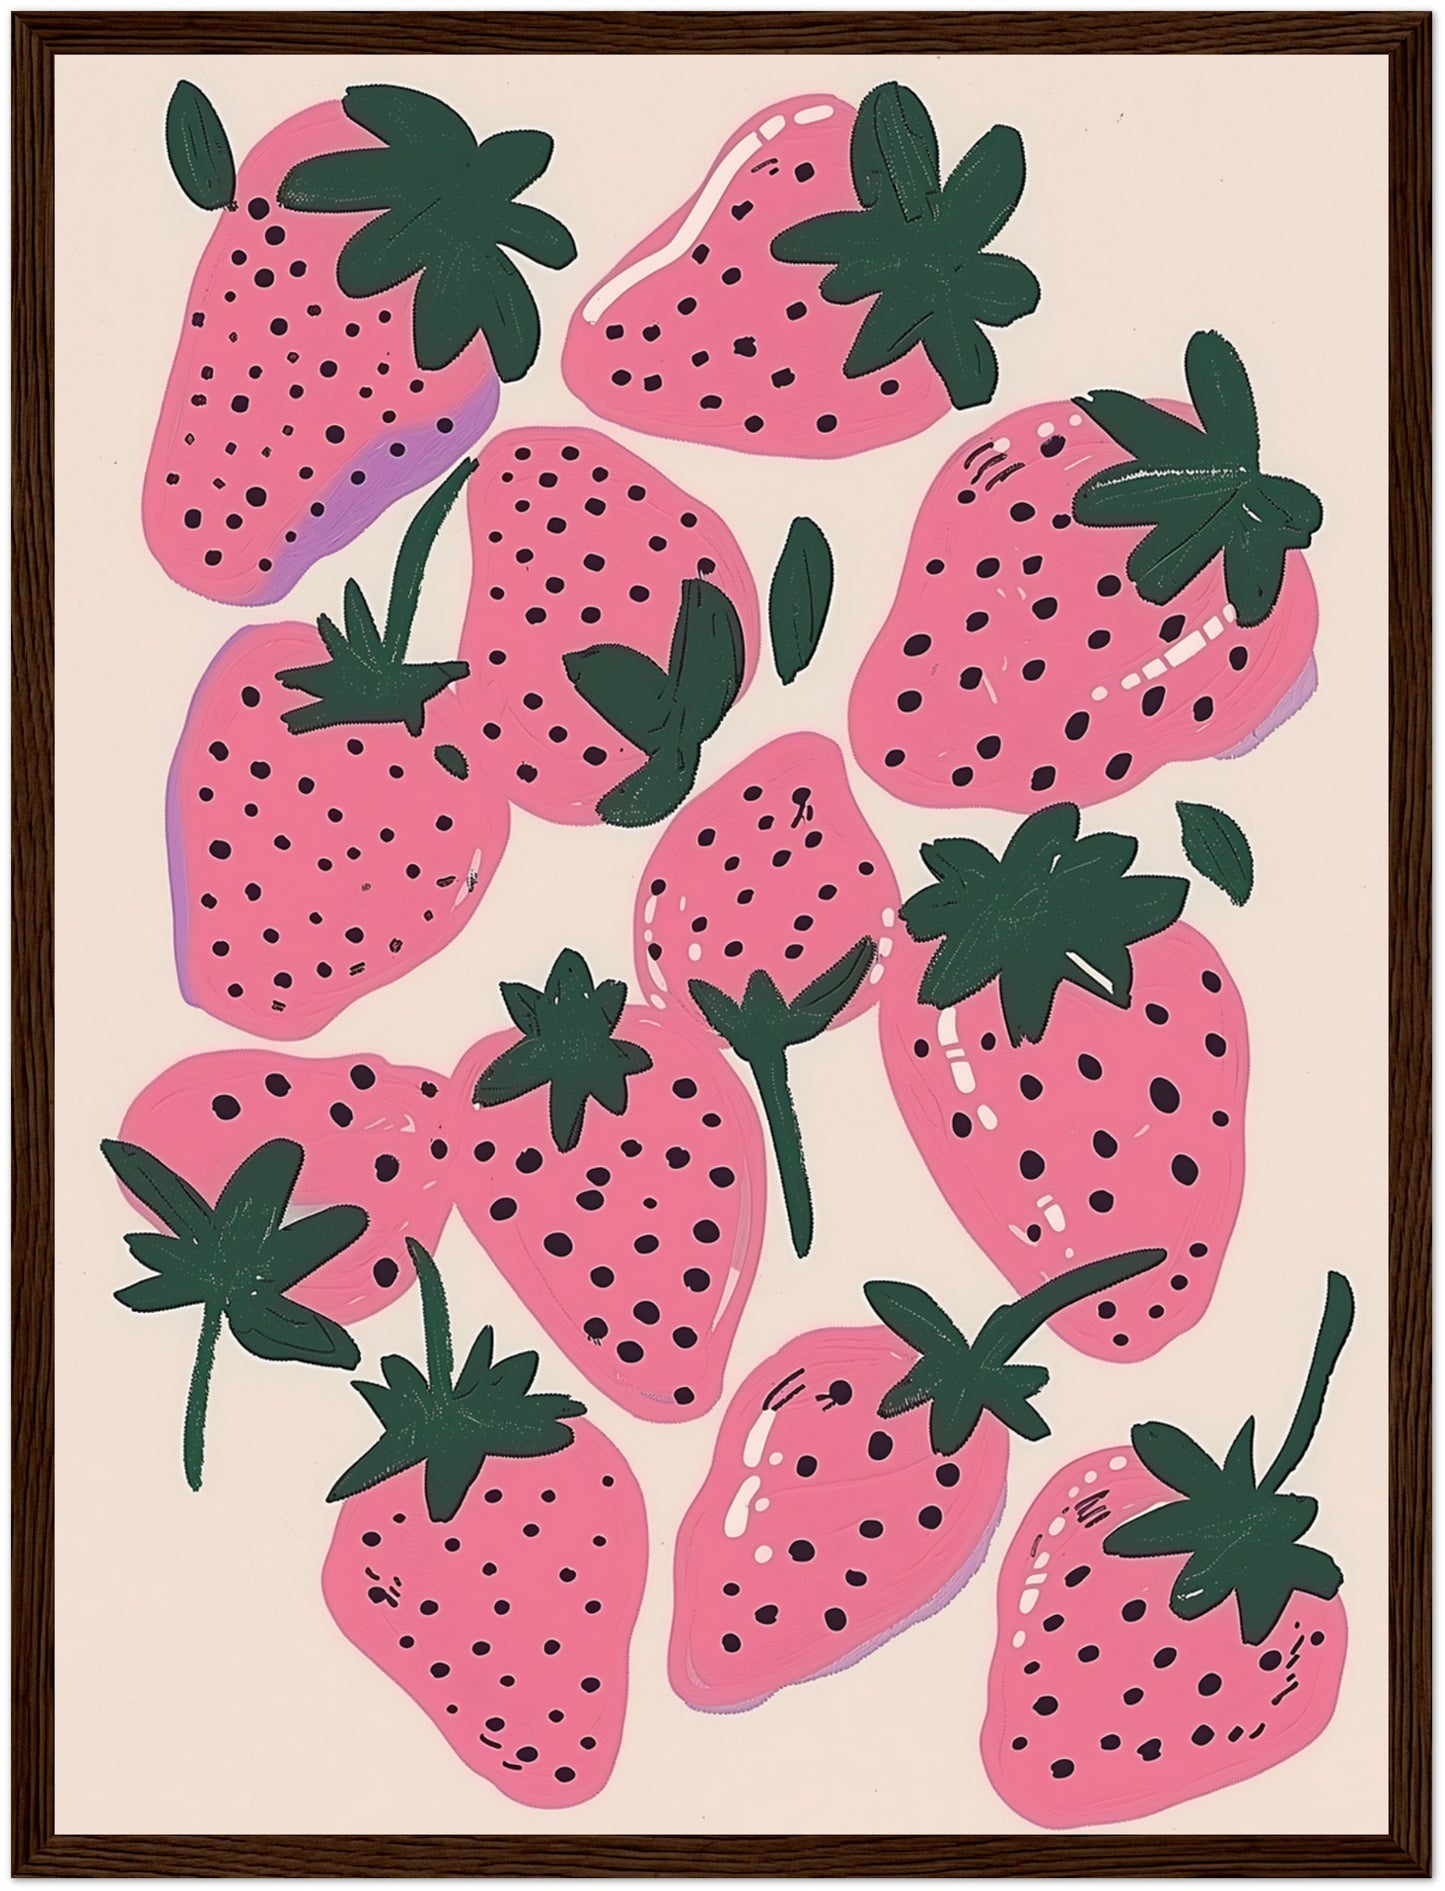 Illustration of stylized pink strawberries with black seeds and green leaves on a light background.